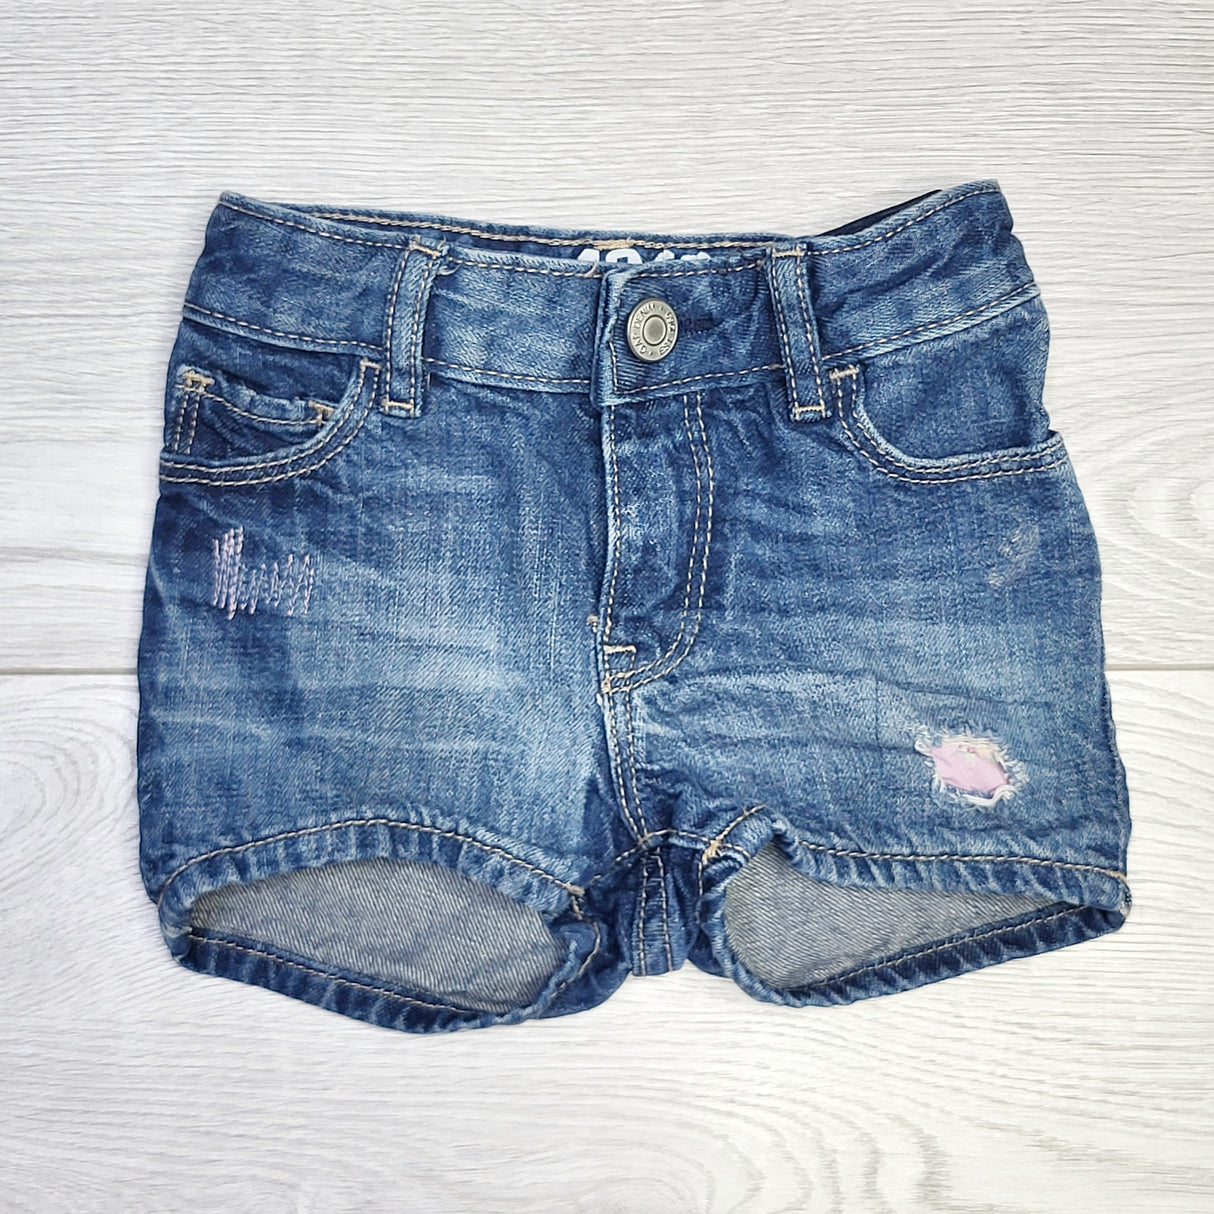 CRTH1 - Gap distressed "Shortie" jeans shorts. Size 12-18 months